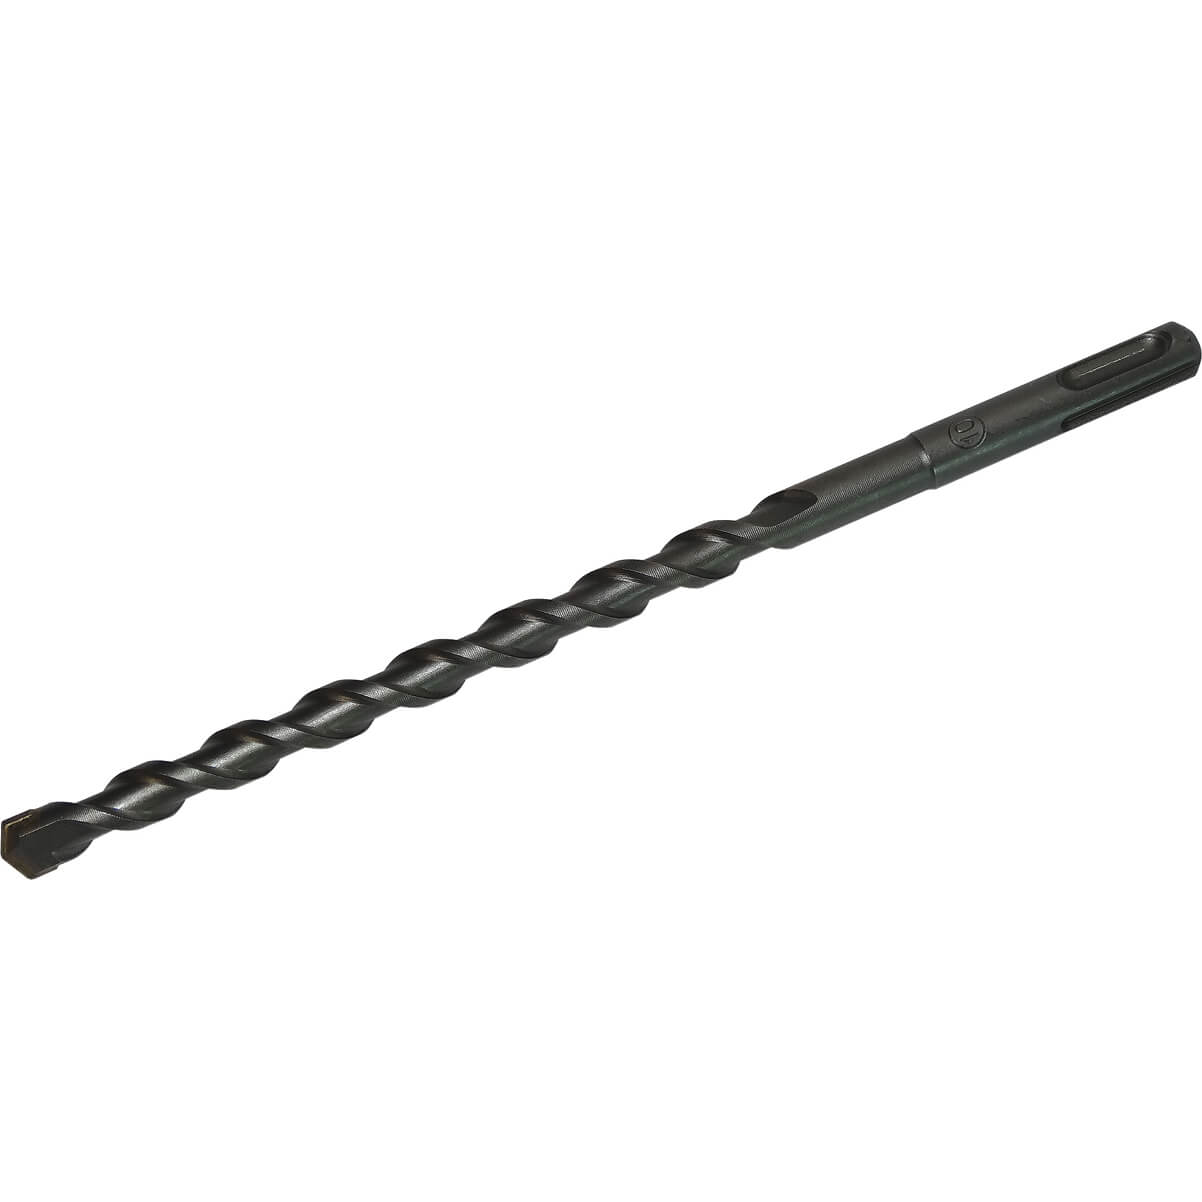 Image of CK SDS Plus Masonry Drill Bit 5mm 110mm Pack of 1